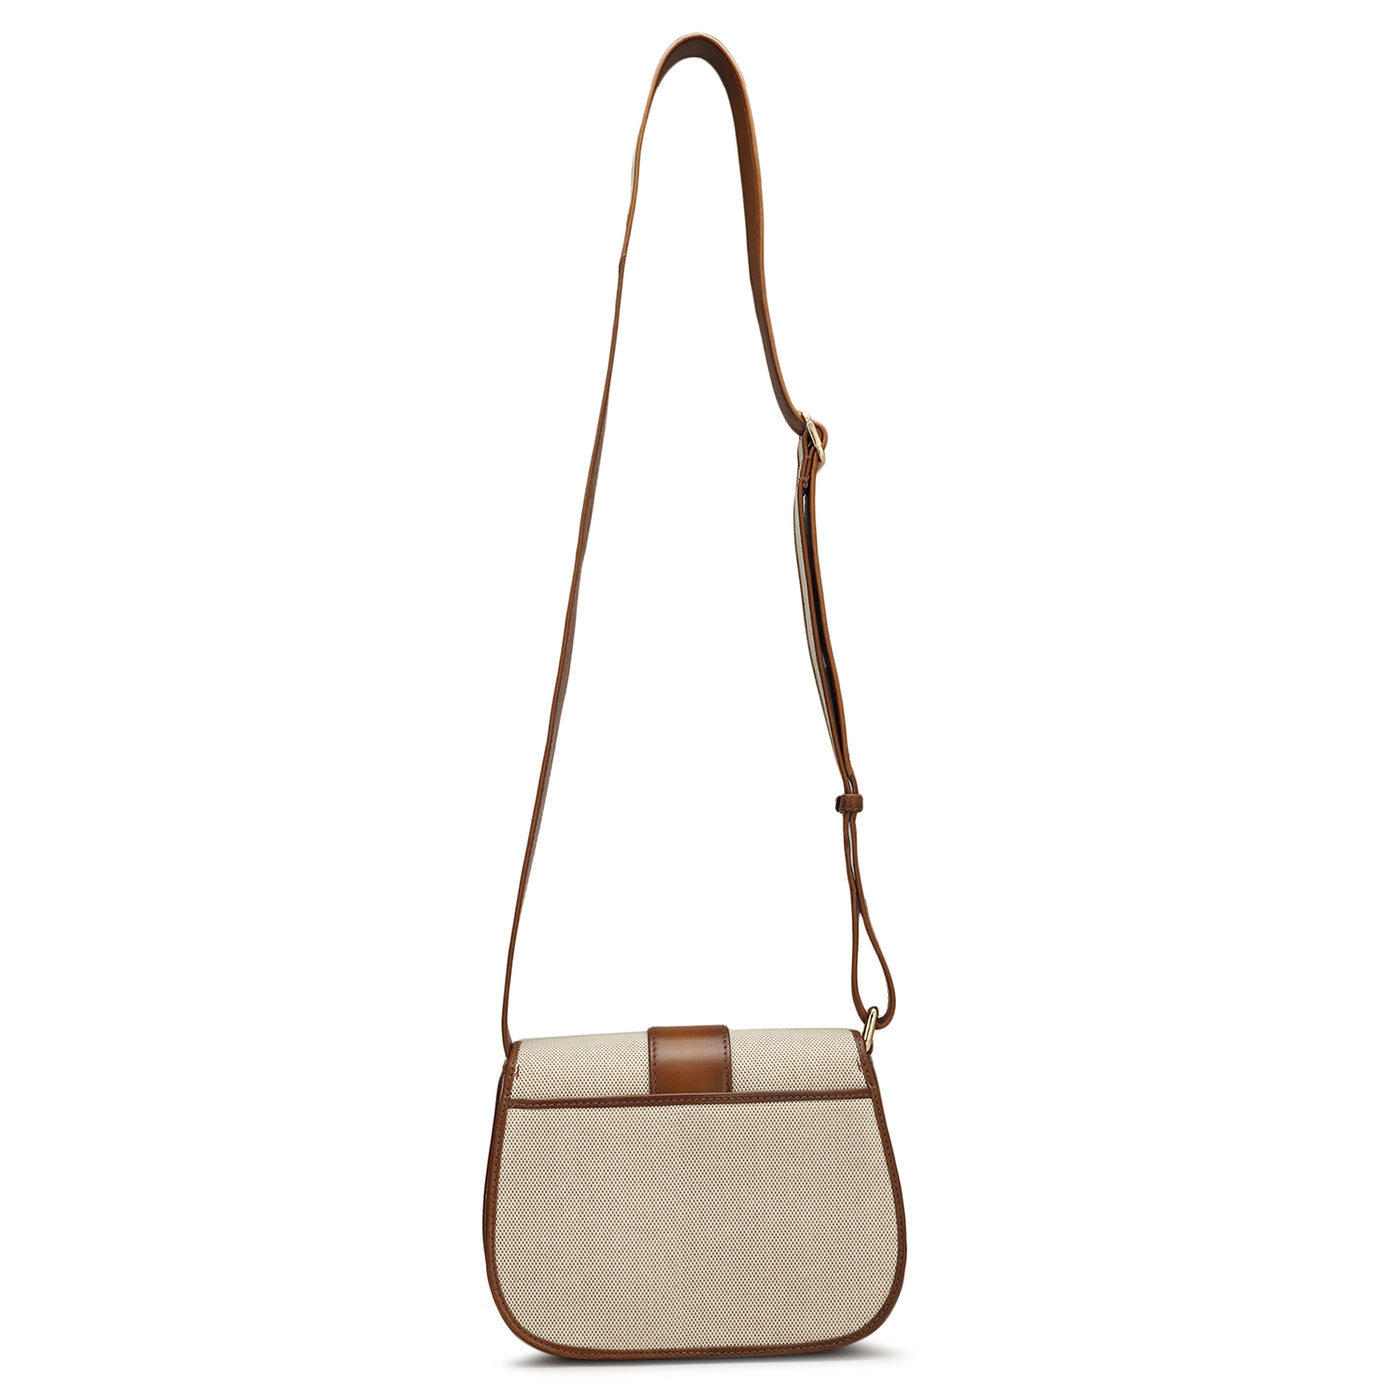 Small Canvas Leather Sling - Beige & Cognac